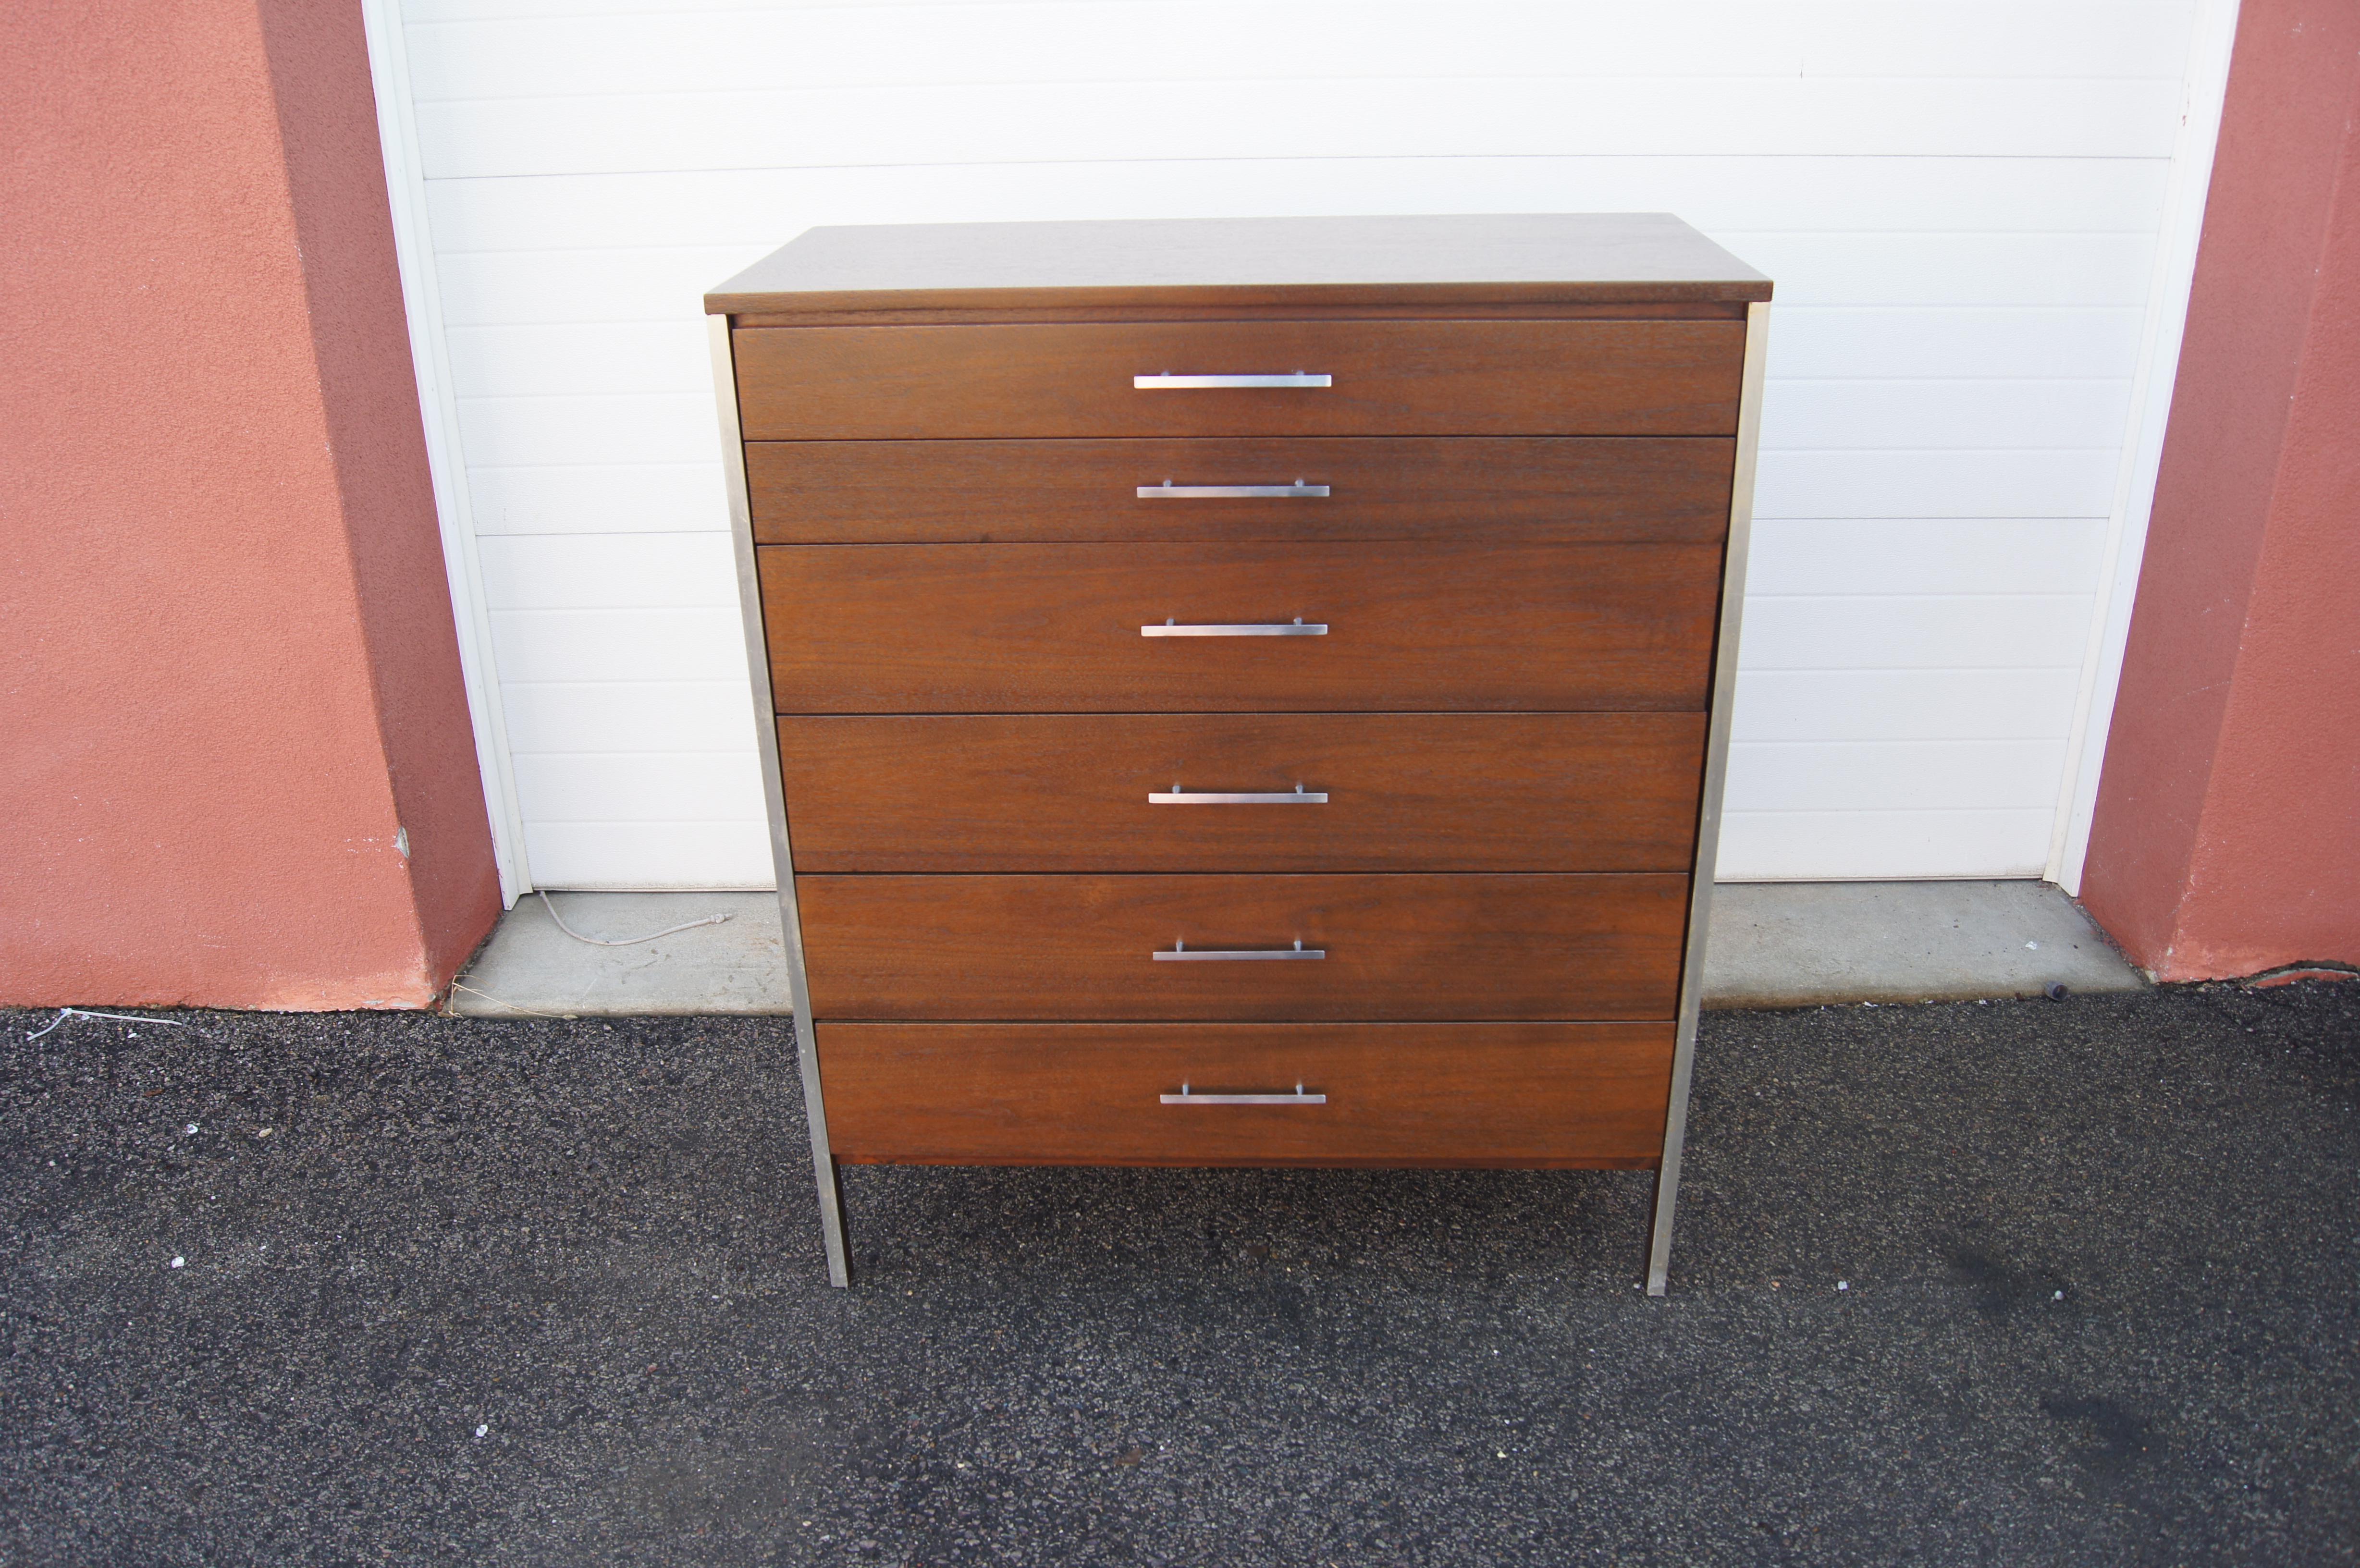 Designed by Paul McCobb and manufactured by Calvin Furniture, this mid-century six-drawer dresser features aluminum accents and slender drawer pulls that emphasize its clean lines and beautiful walnut grain. The topmost drawer is divided into three